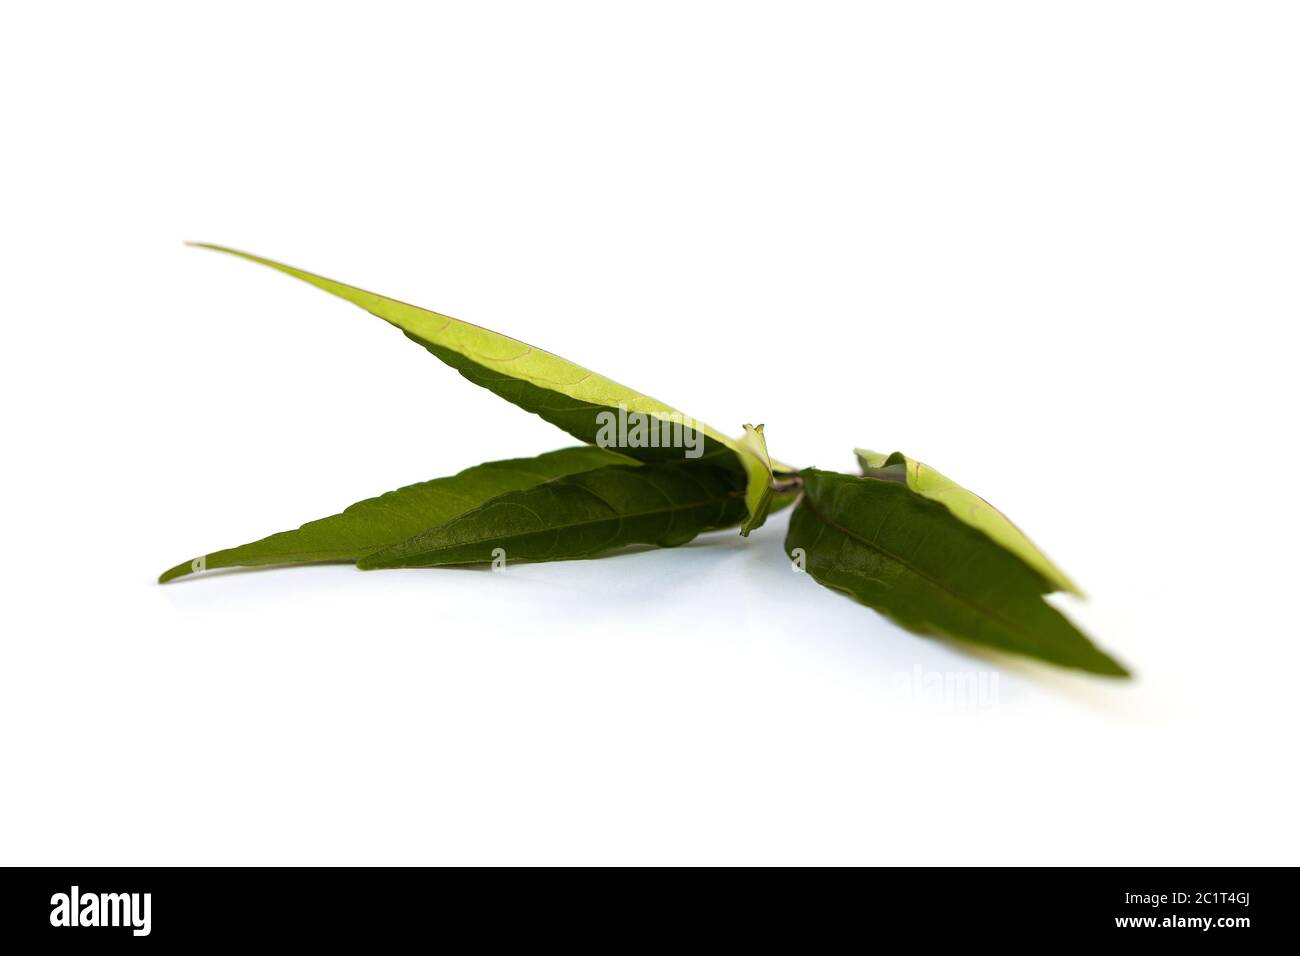 Willow-leaved Justicia medical plant Stock Photo